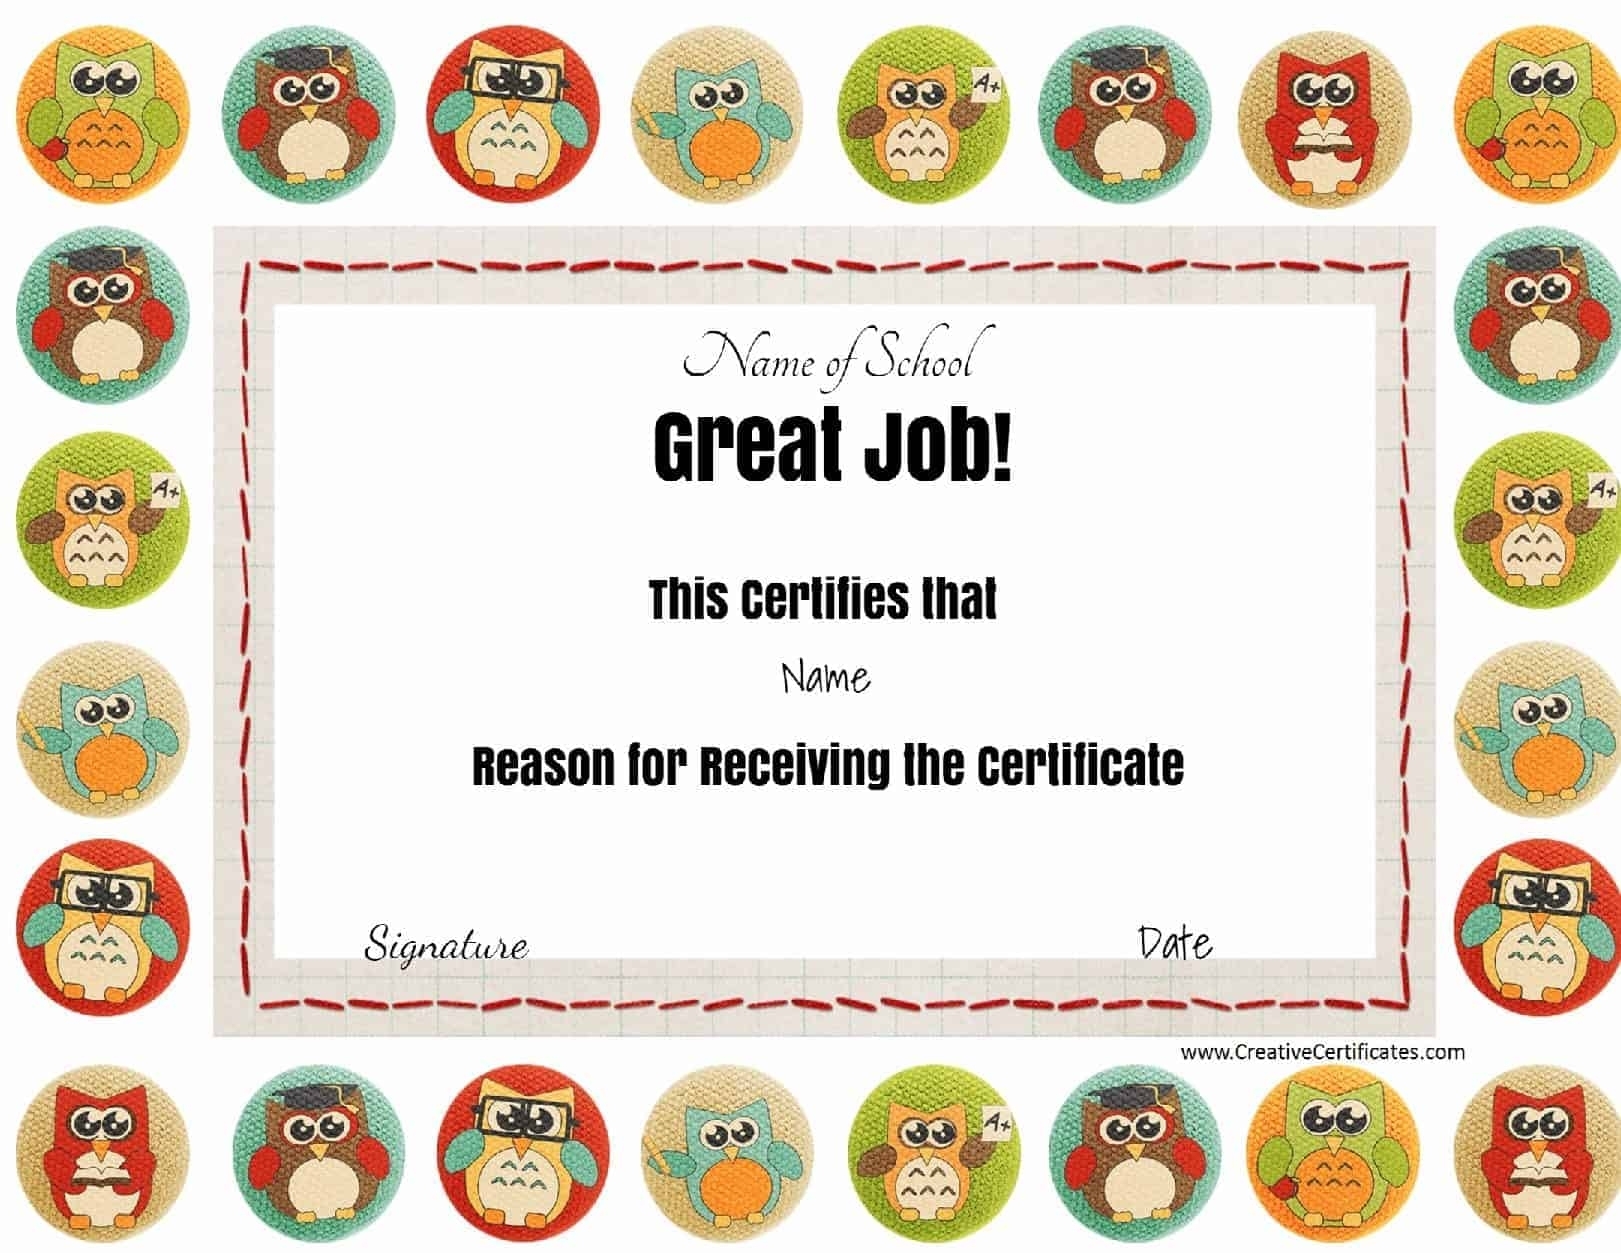 Free School Certificates & Awards With Regard To Certificate Templates For School